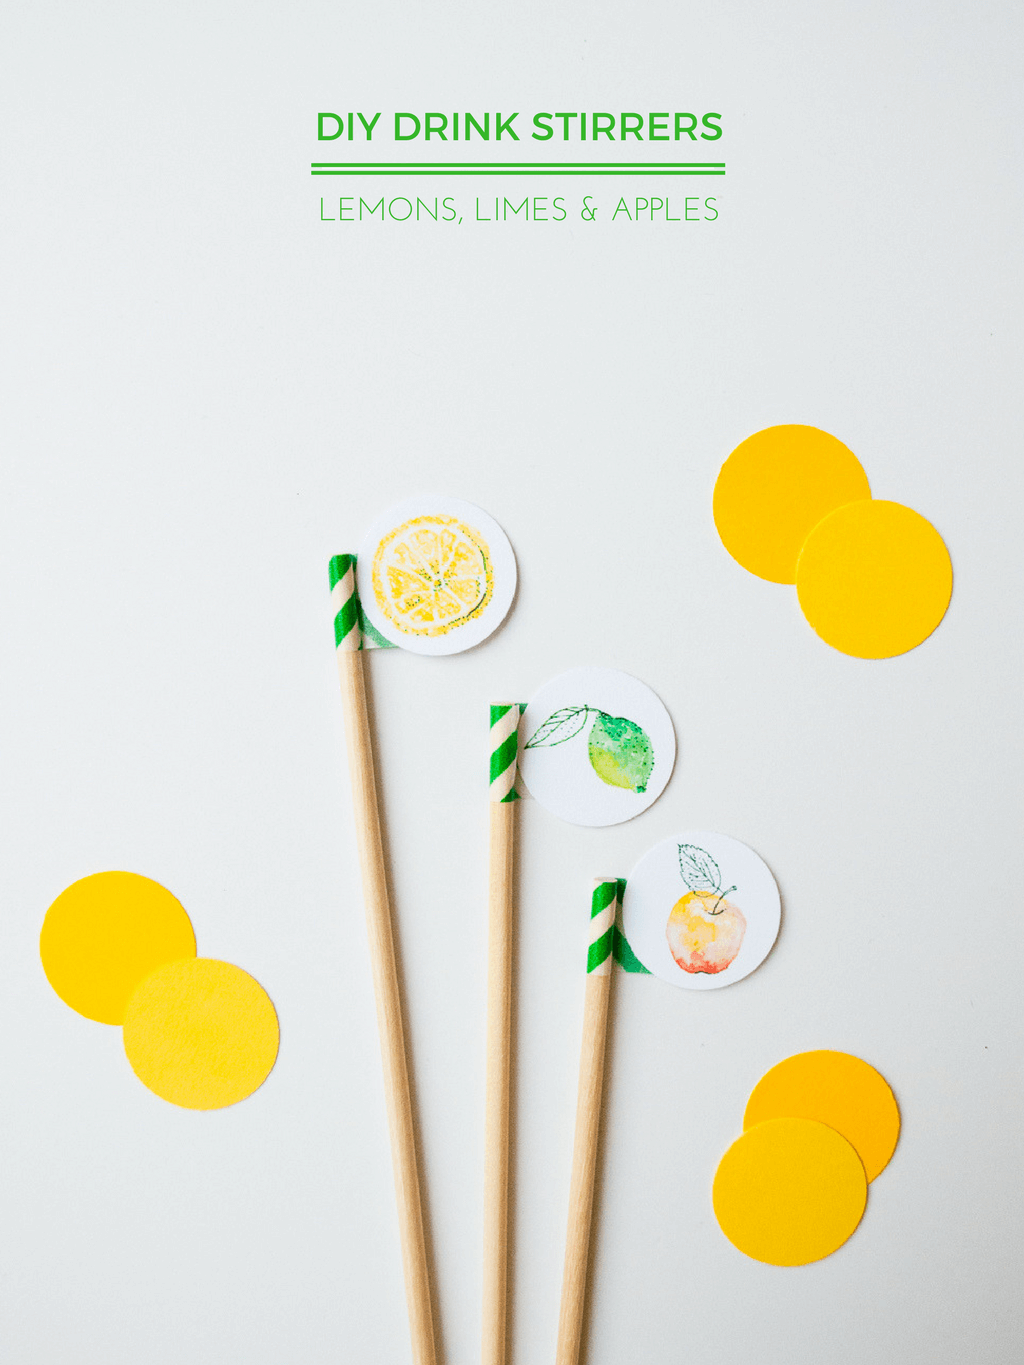 Make easy DIY drink stirrers for cocktails. Easily personalize them with your own image or words. Just print, punch, and attach to wood stirrers using washi tape. #drinkstirrers #diy #spon